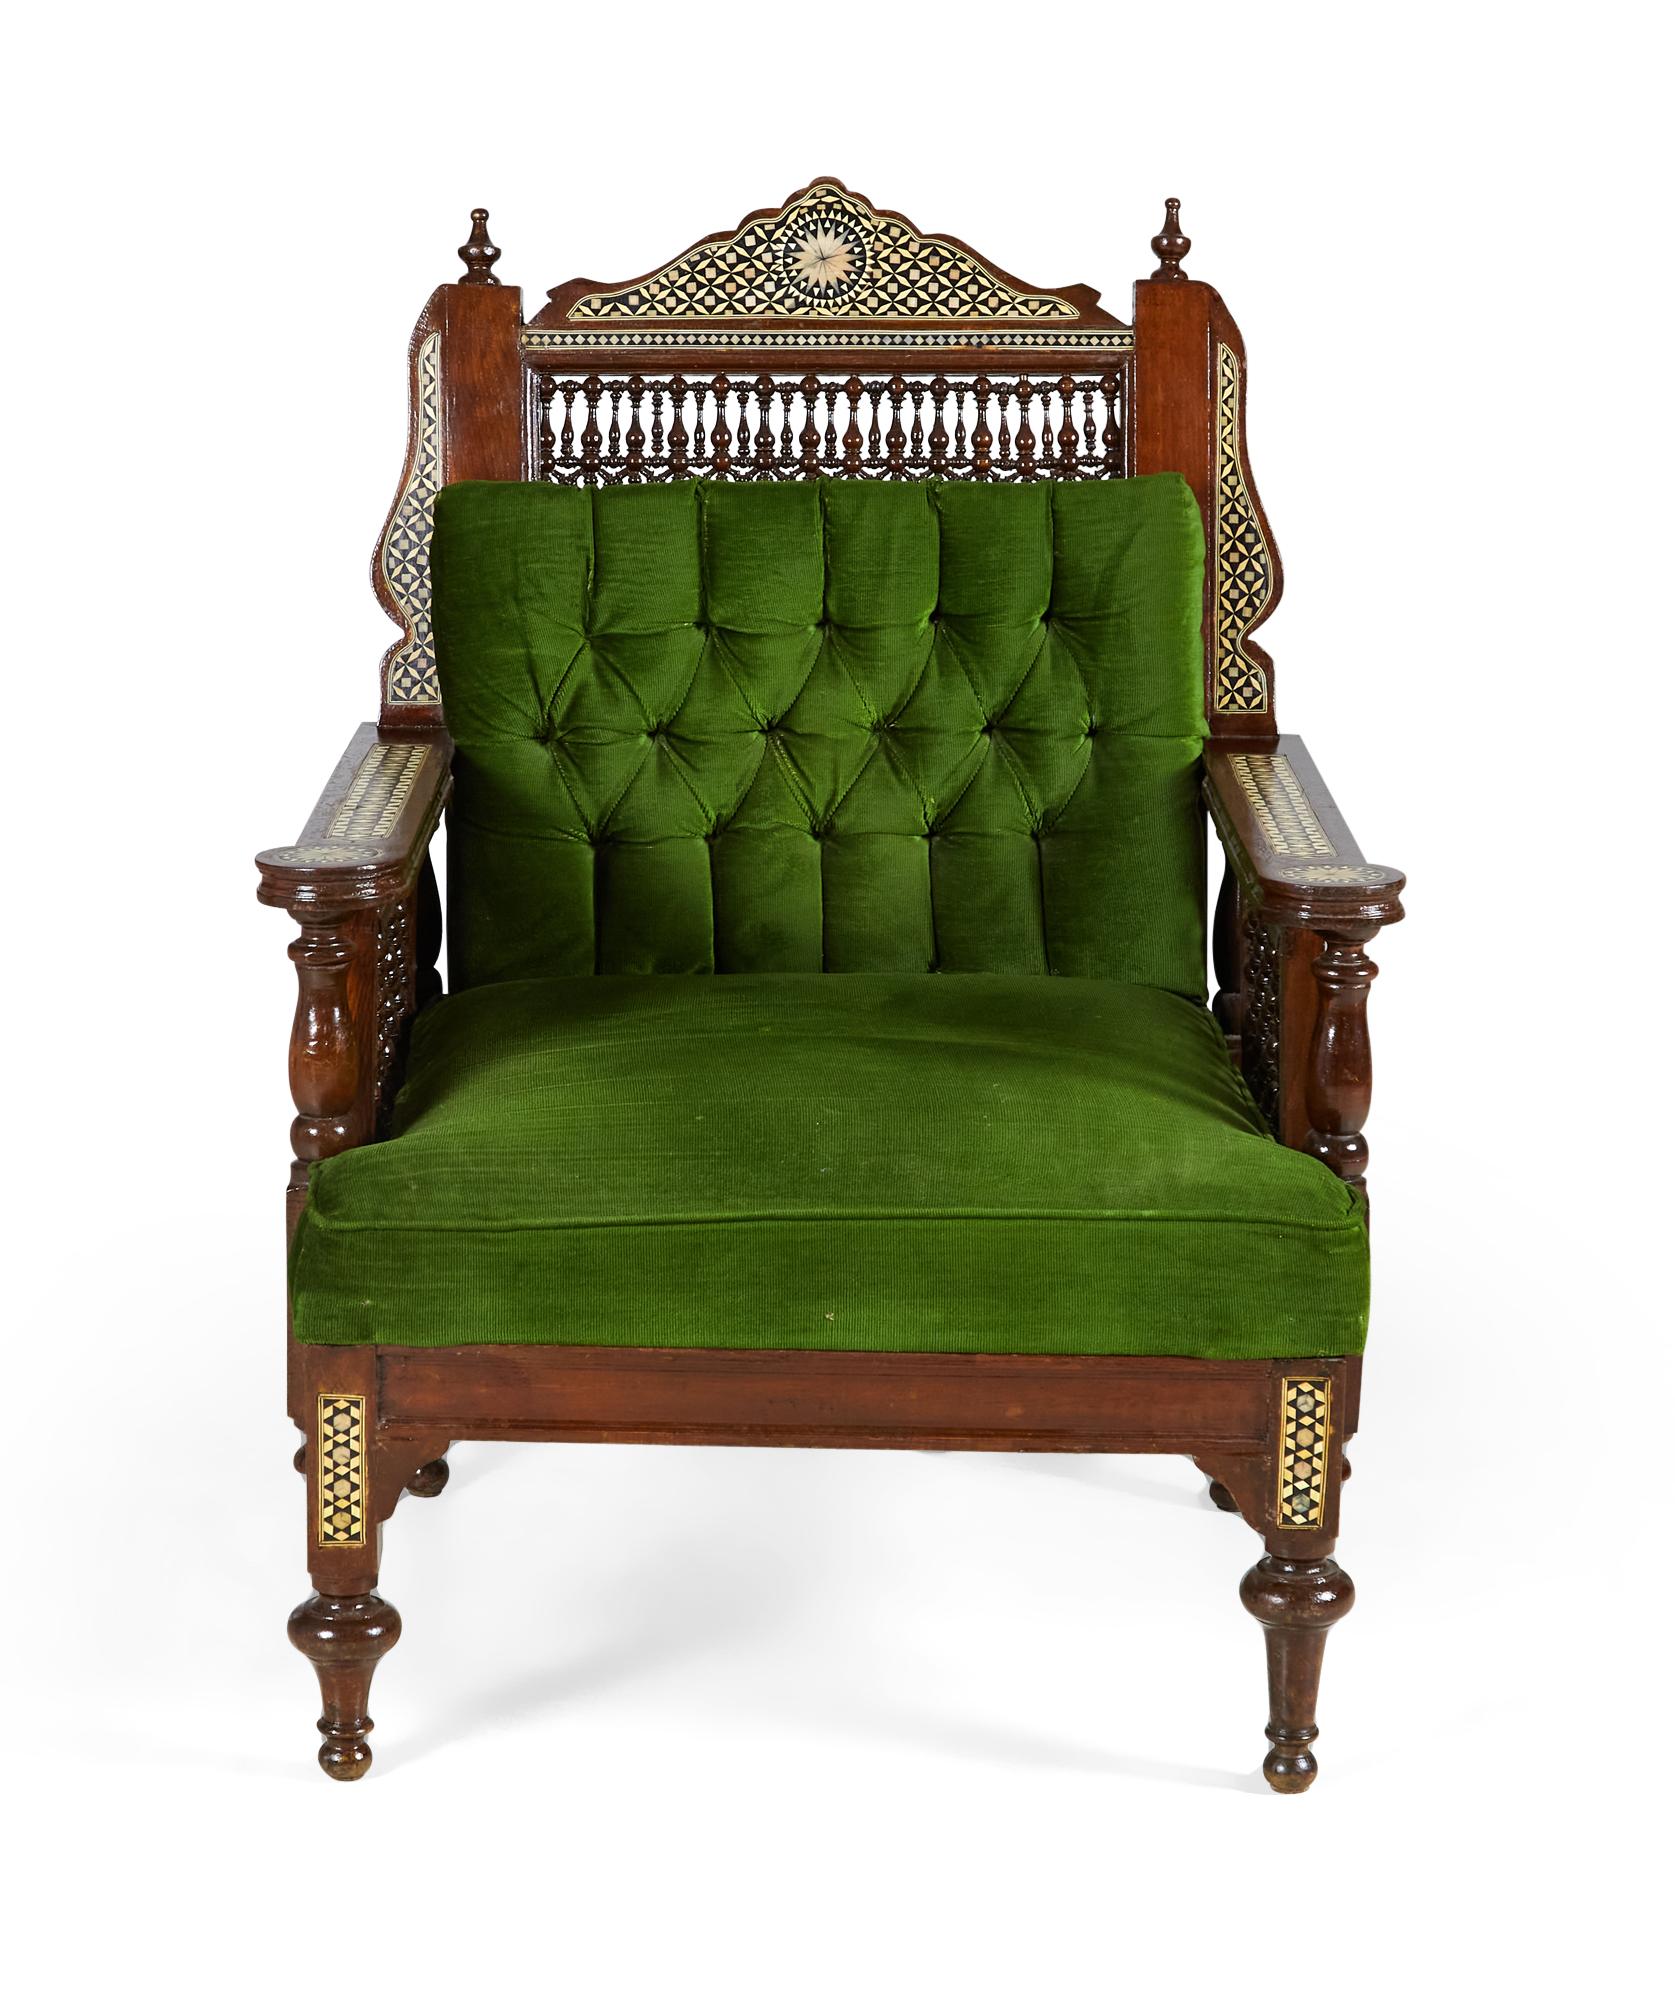 Pair of Middle Eastern Syrian-style (20th Century) armchairs in walnut with inlaid mother of pearl and ebony marquetry having emerald green tufted upholstery, with spindle and finial details (priced as pair).
  